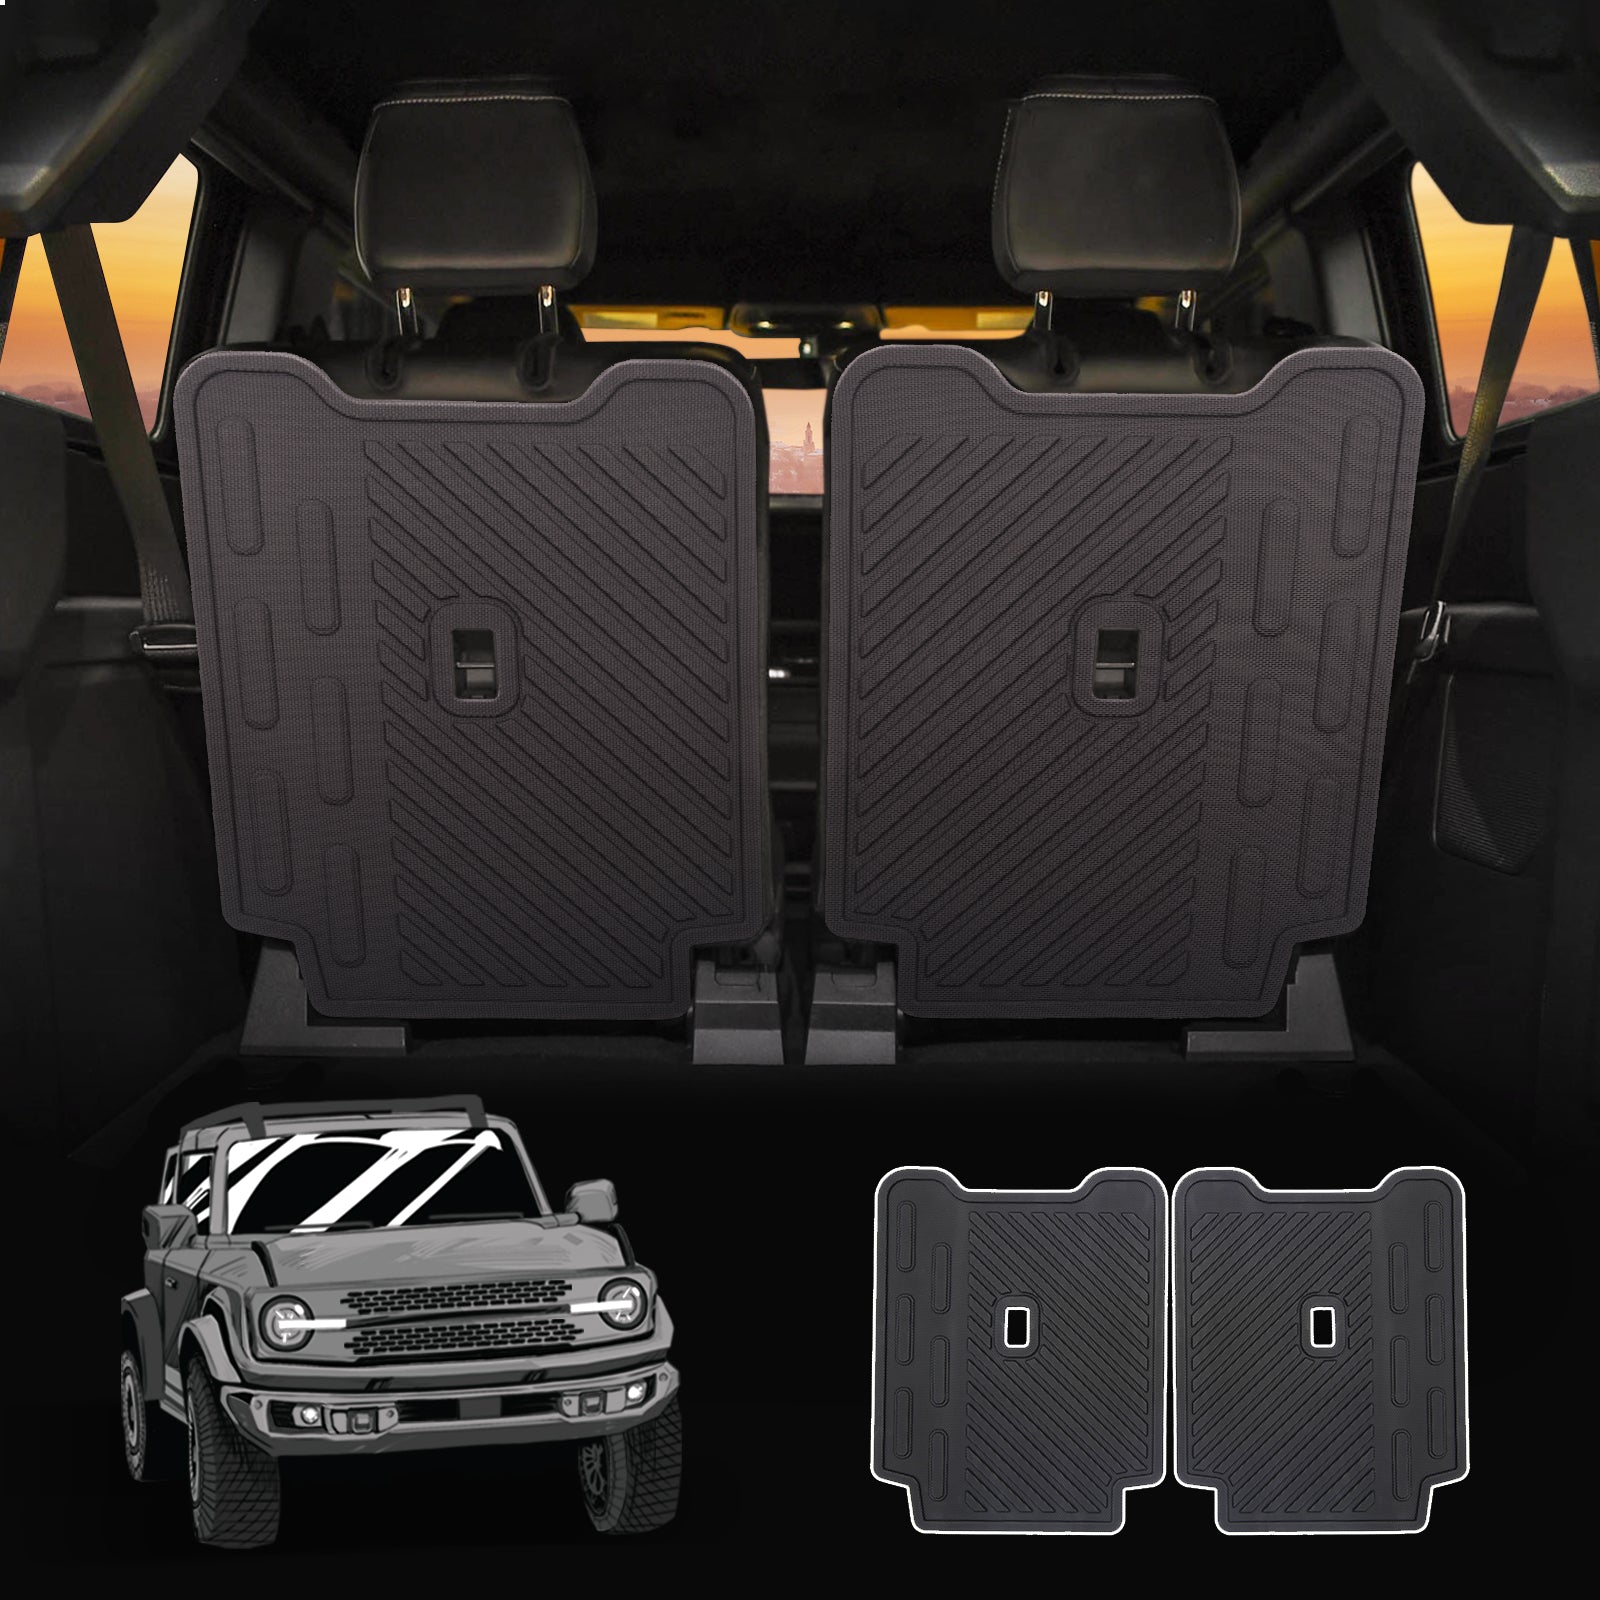 Rear Seat Back Cover 3D Precise Protector Compatible with Ford 2021 2022 2023 Bronco Accessories 2 Door Cargo/Trunk Dog Seat Liner Mat 2 PCS